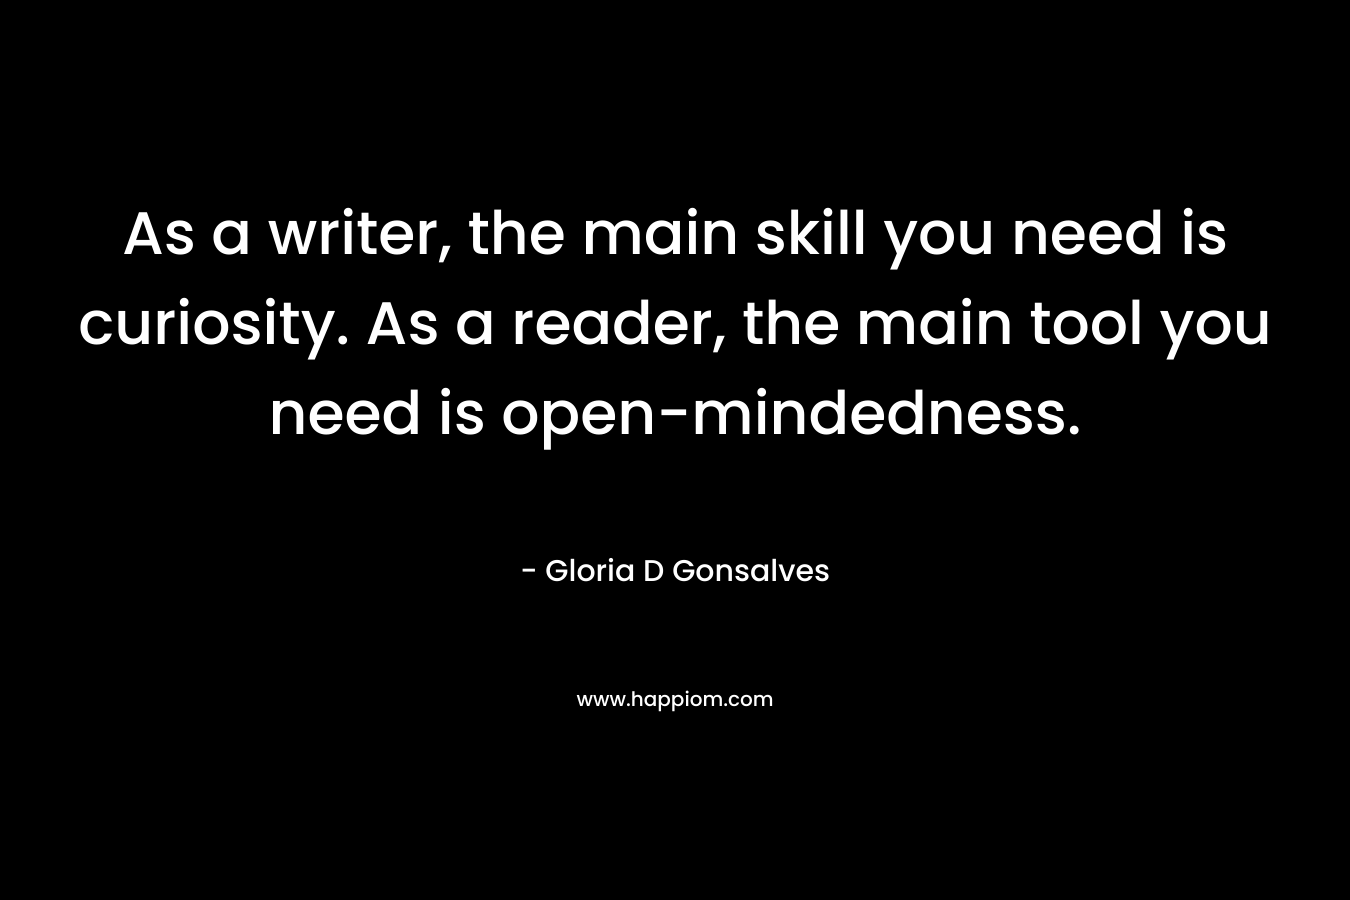 As a writer, the main skill you need is curiosity. As a reader, the main tool you need is open-mindedness.